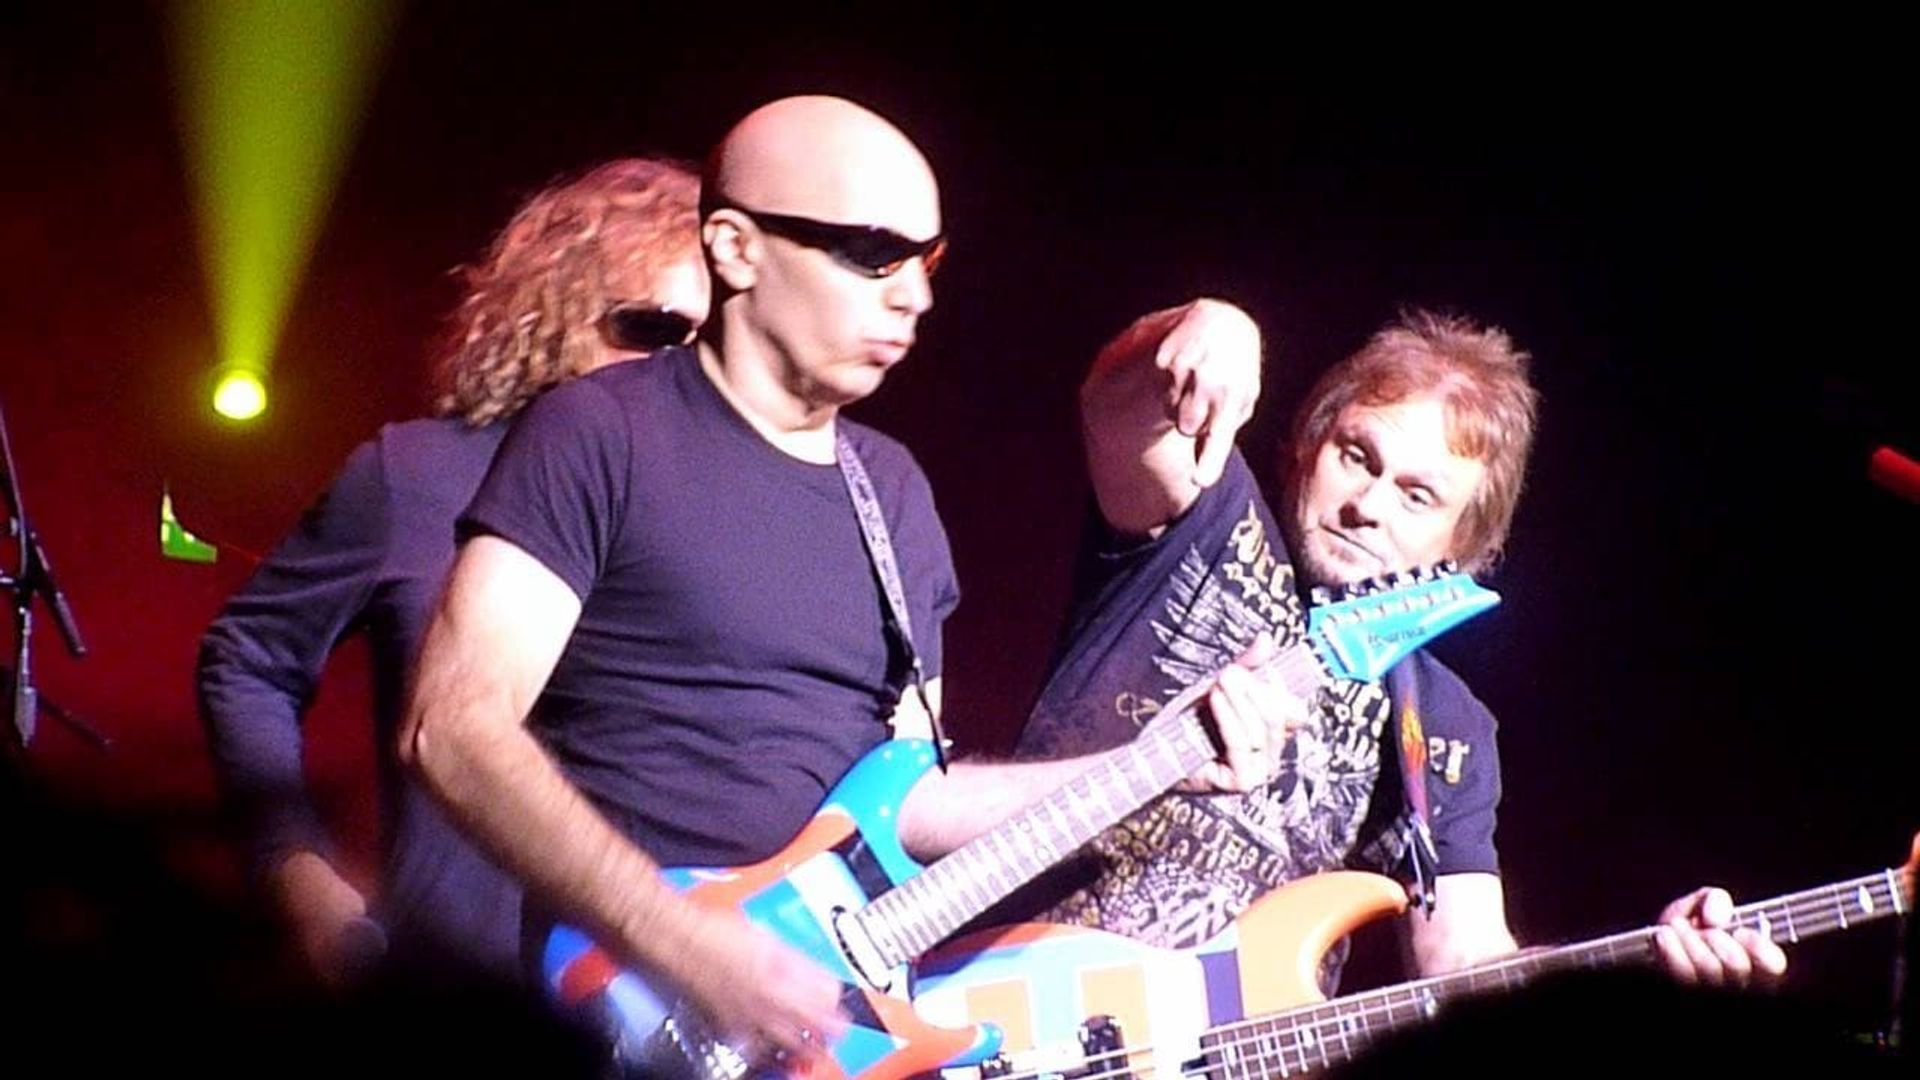 Chickenfoot: Get Your Buzz on Live background